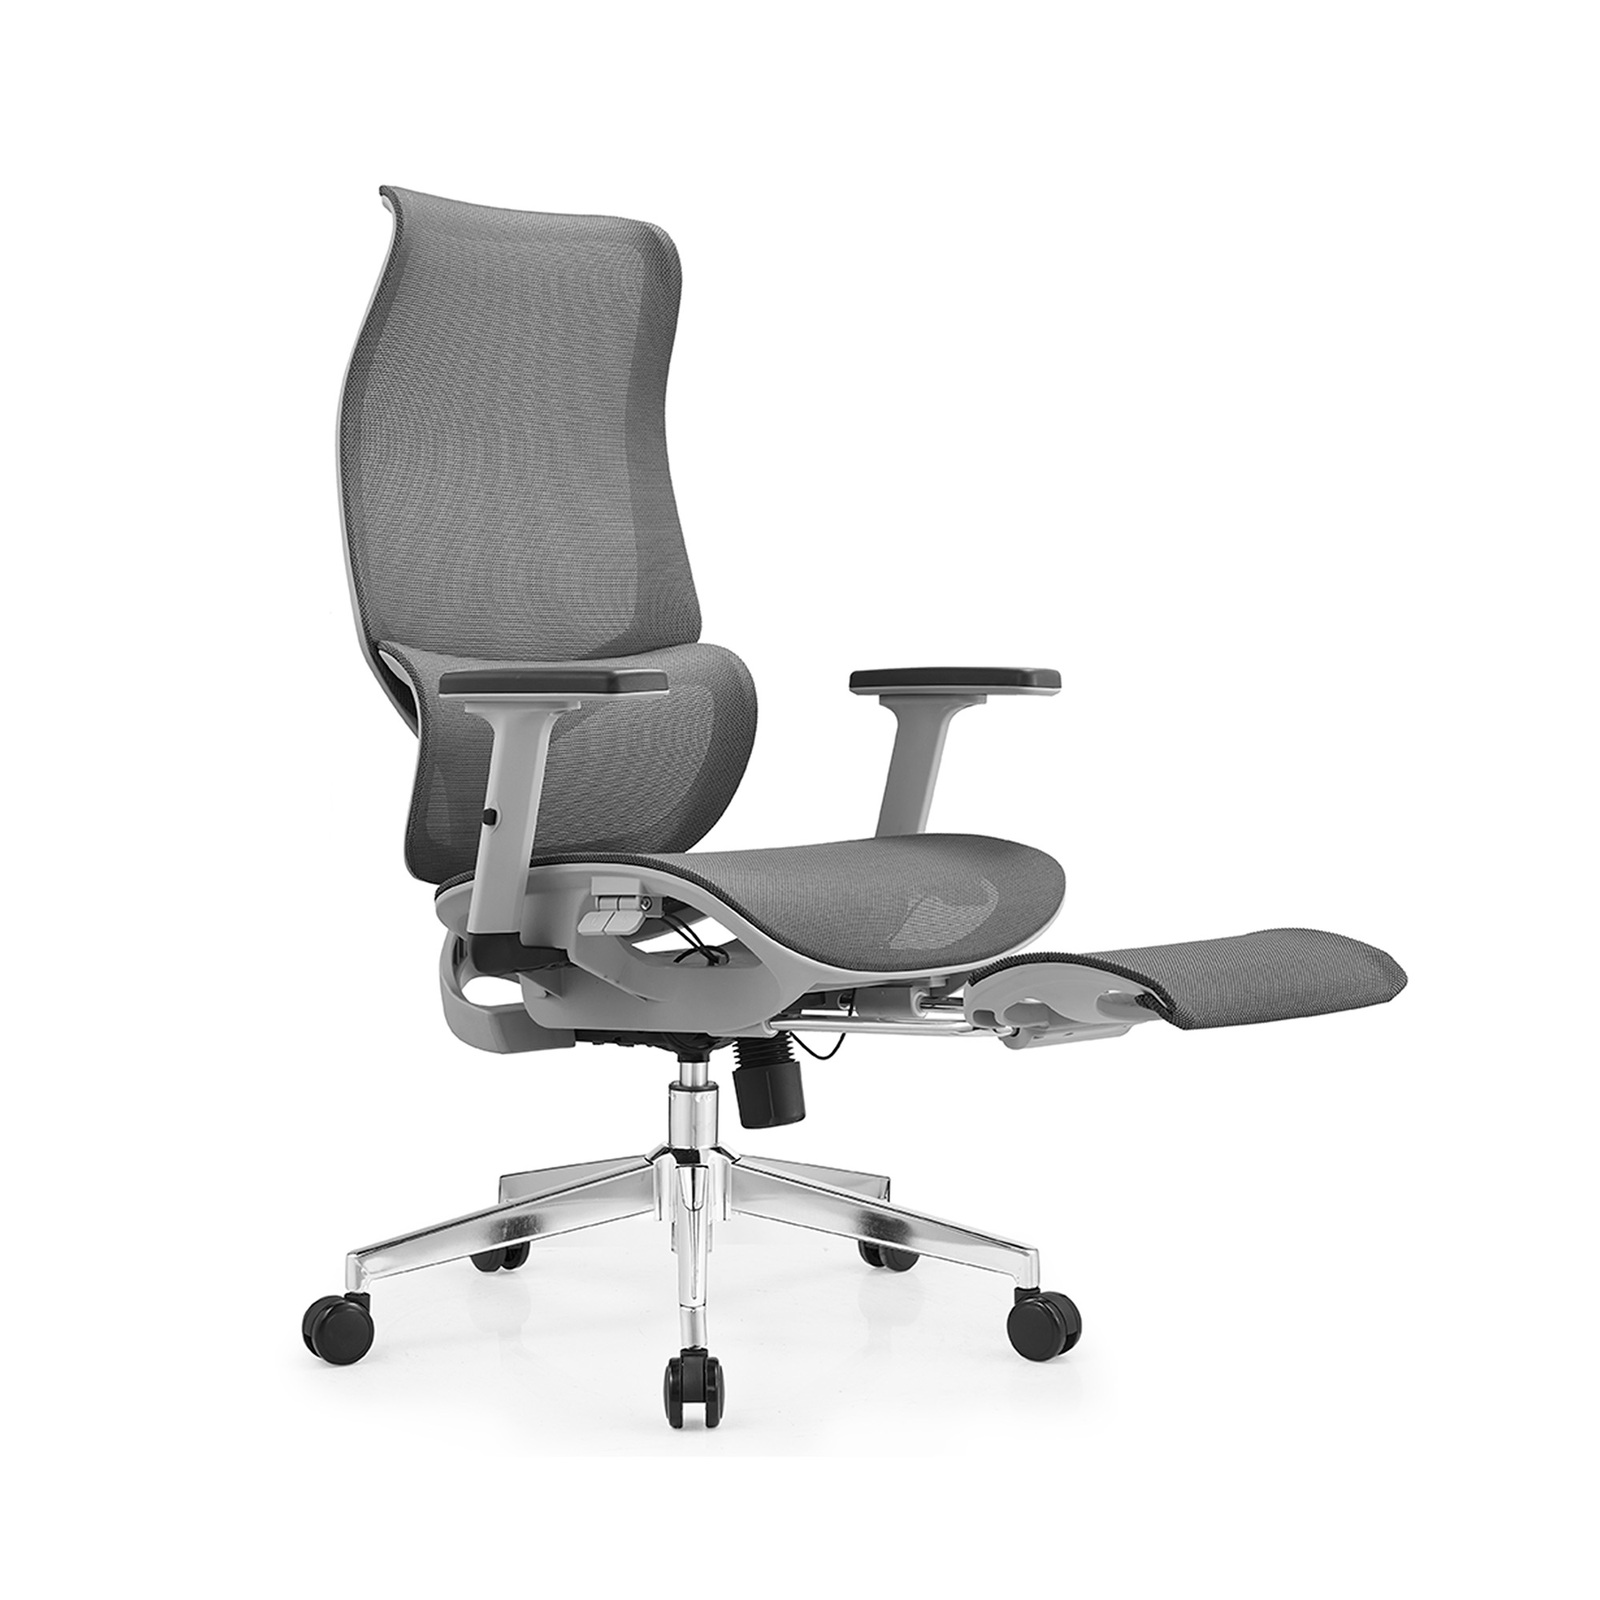 Ergonomic Mesh Gaming Office Chair Office Chairs Executive Footrest Computer Seat - Grey